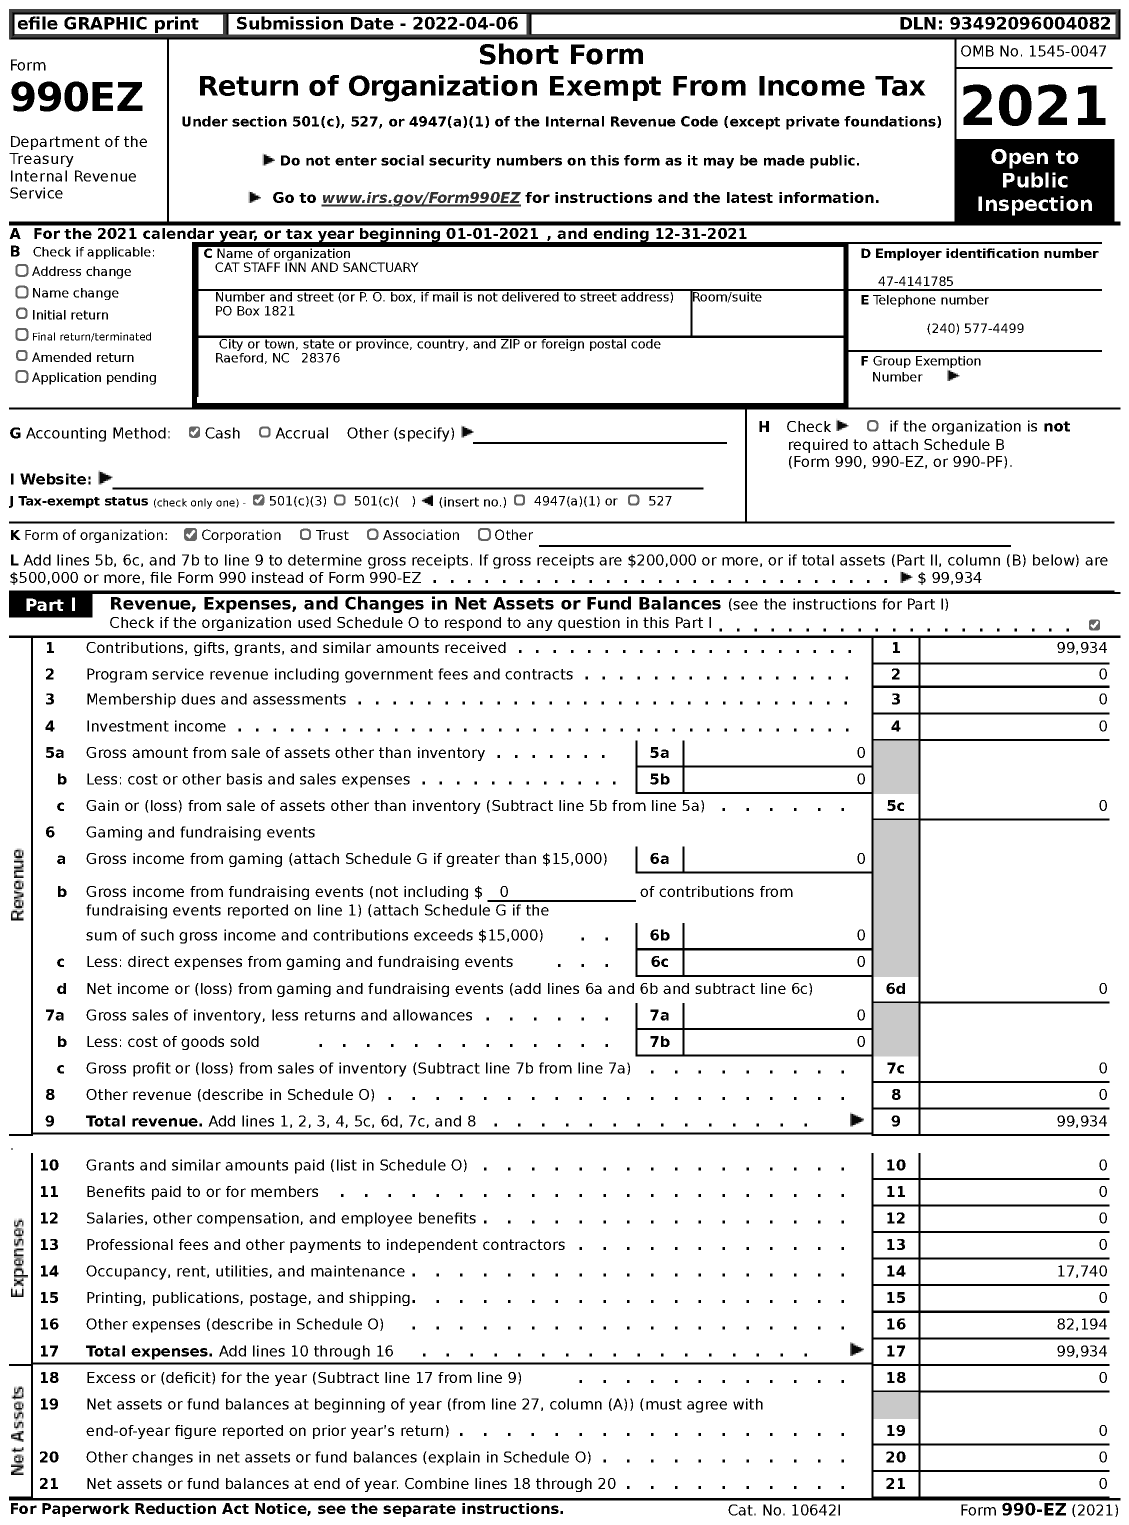 Image of first page of 2021 Form 990EZ for Cat Staff Inn and Sanctuary